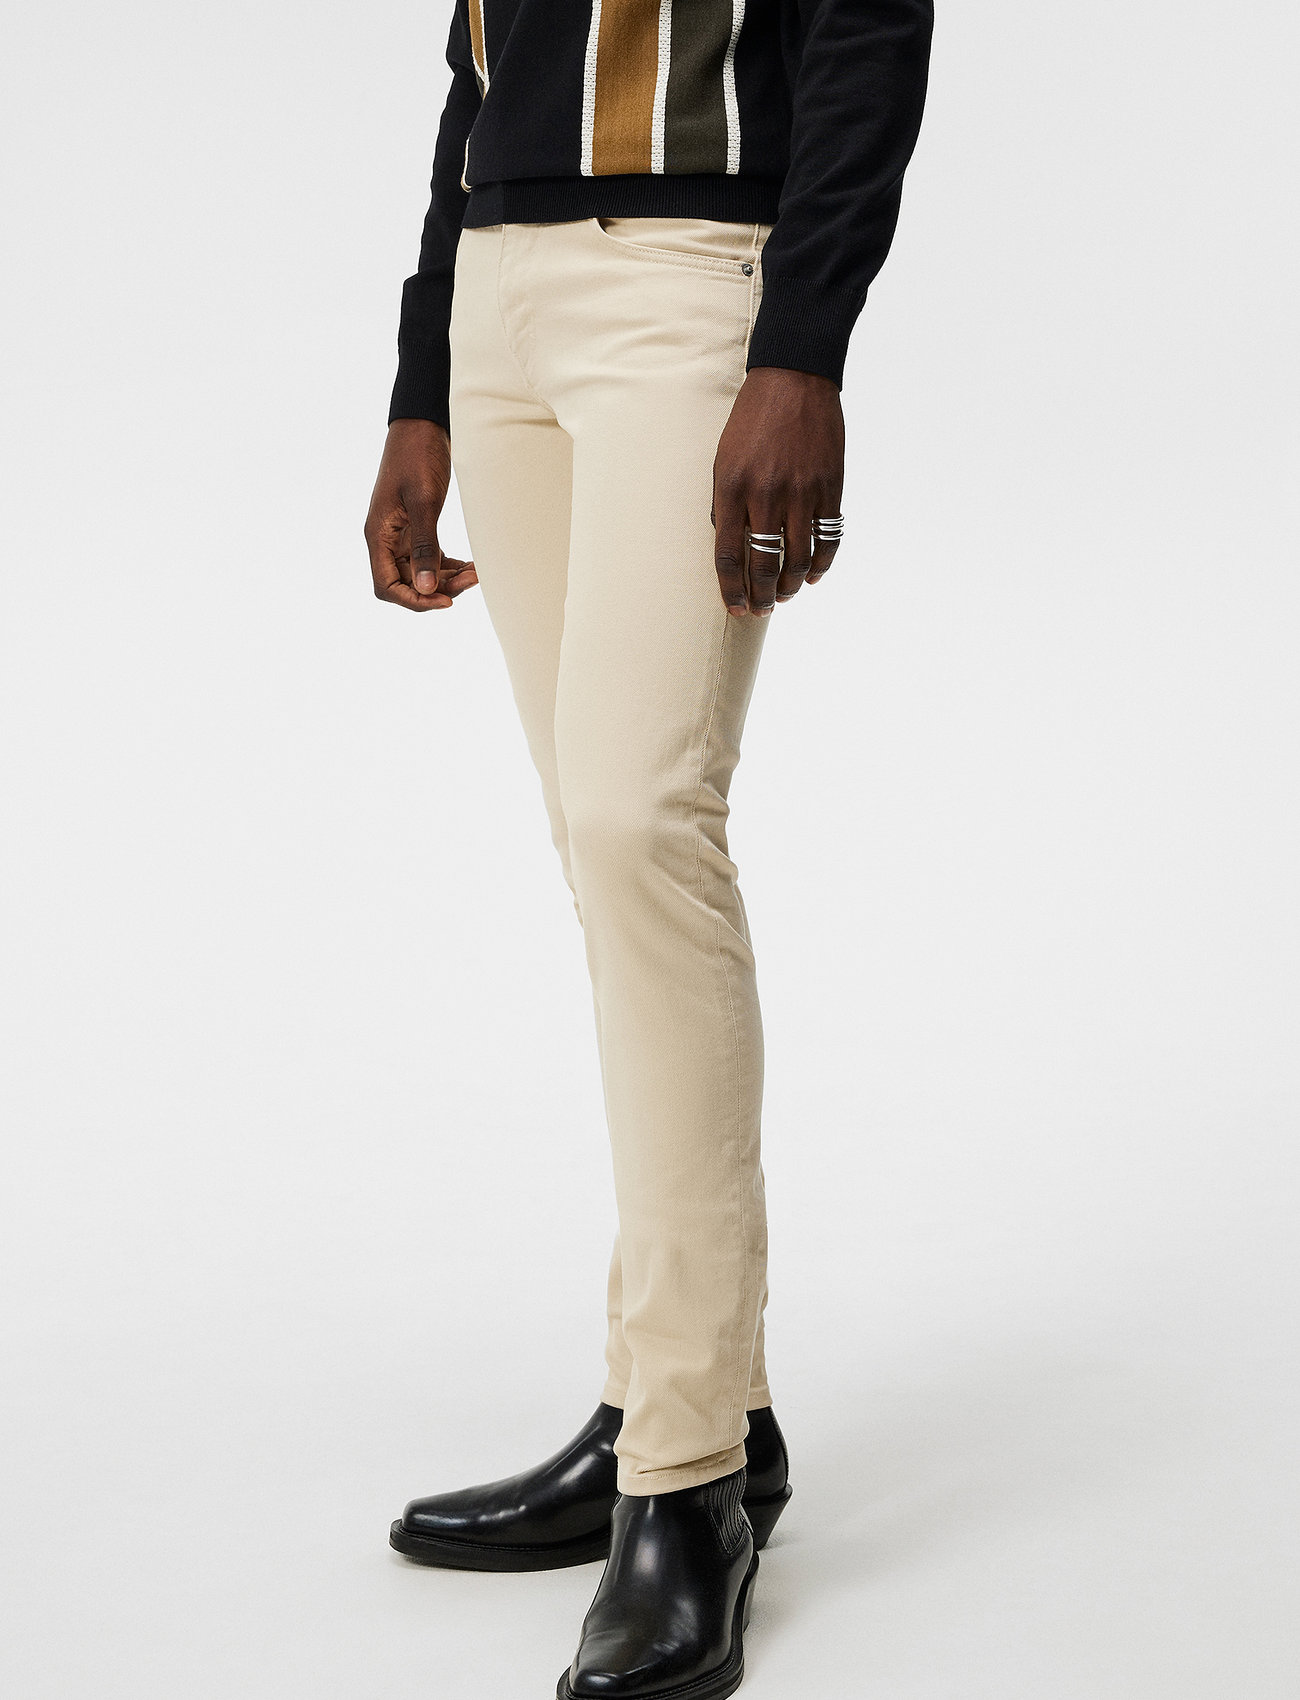 J. Lindeberg - Jay Solid Stretch Jeans - slim jeans - oyster gray - 1